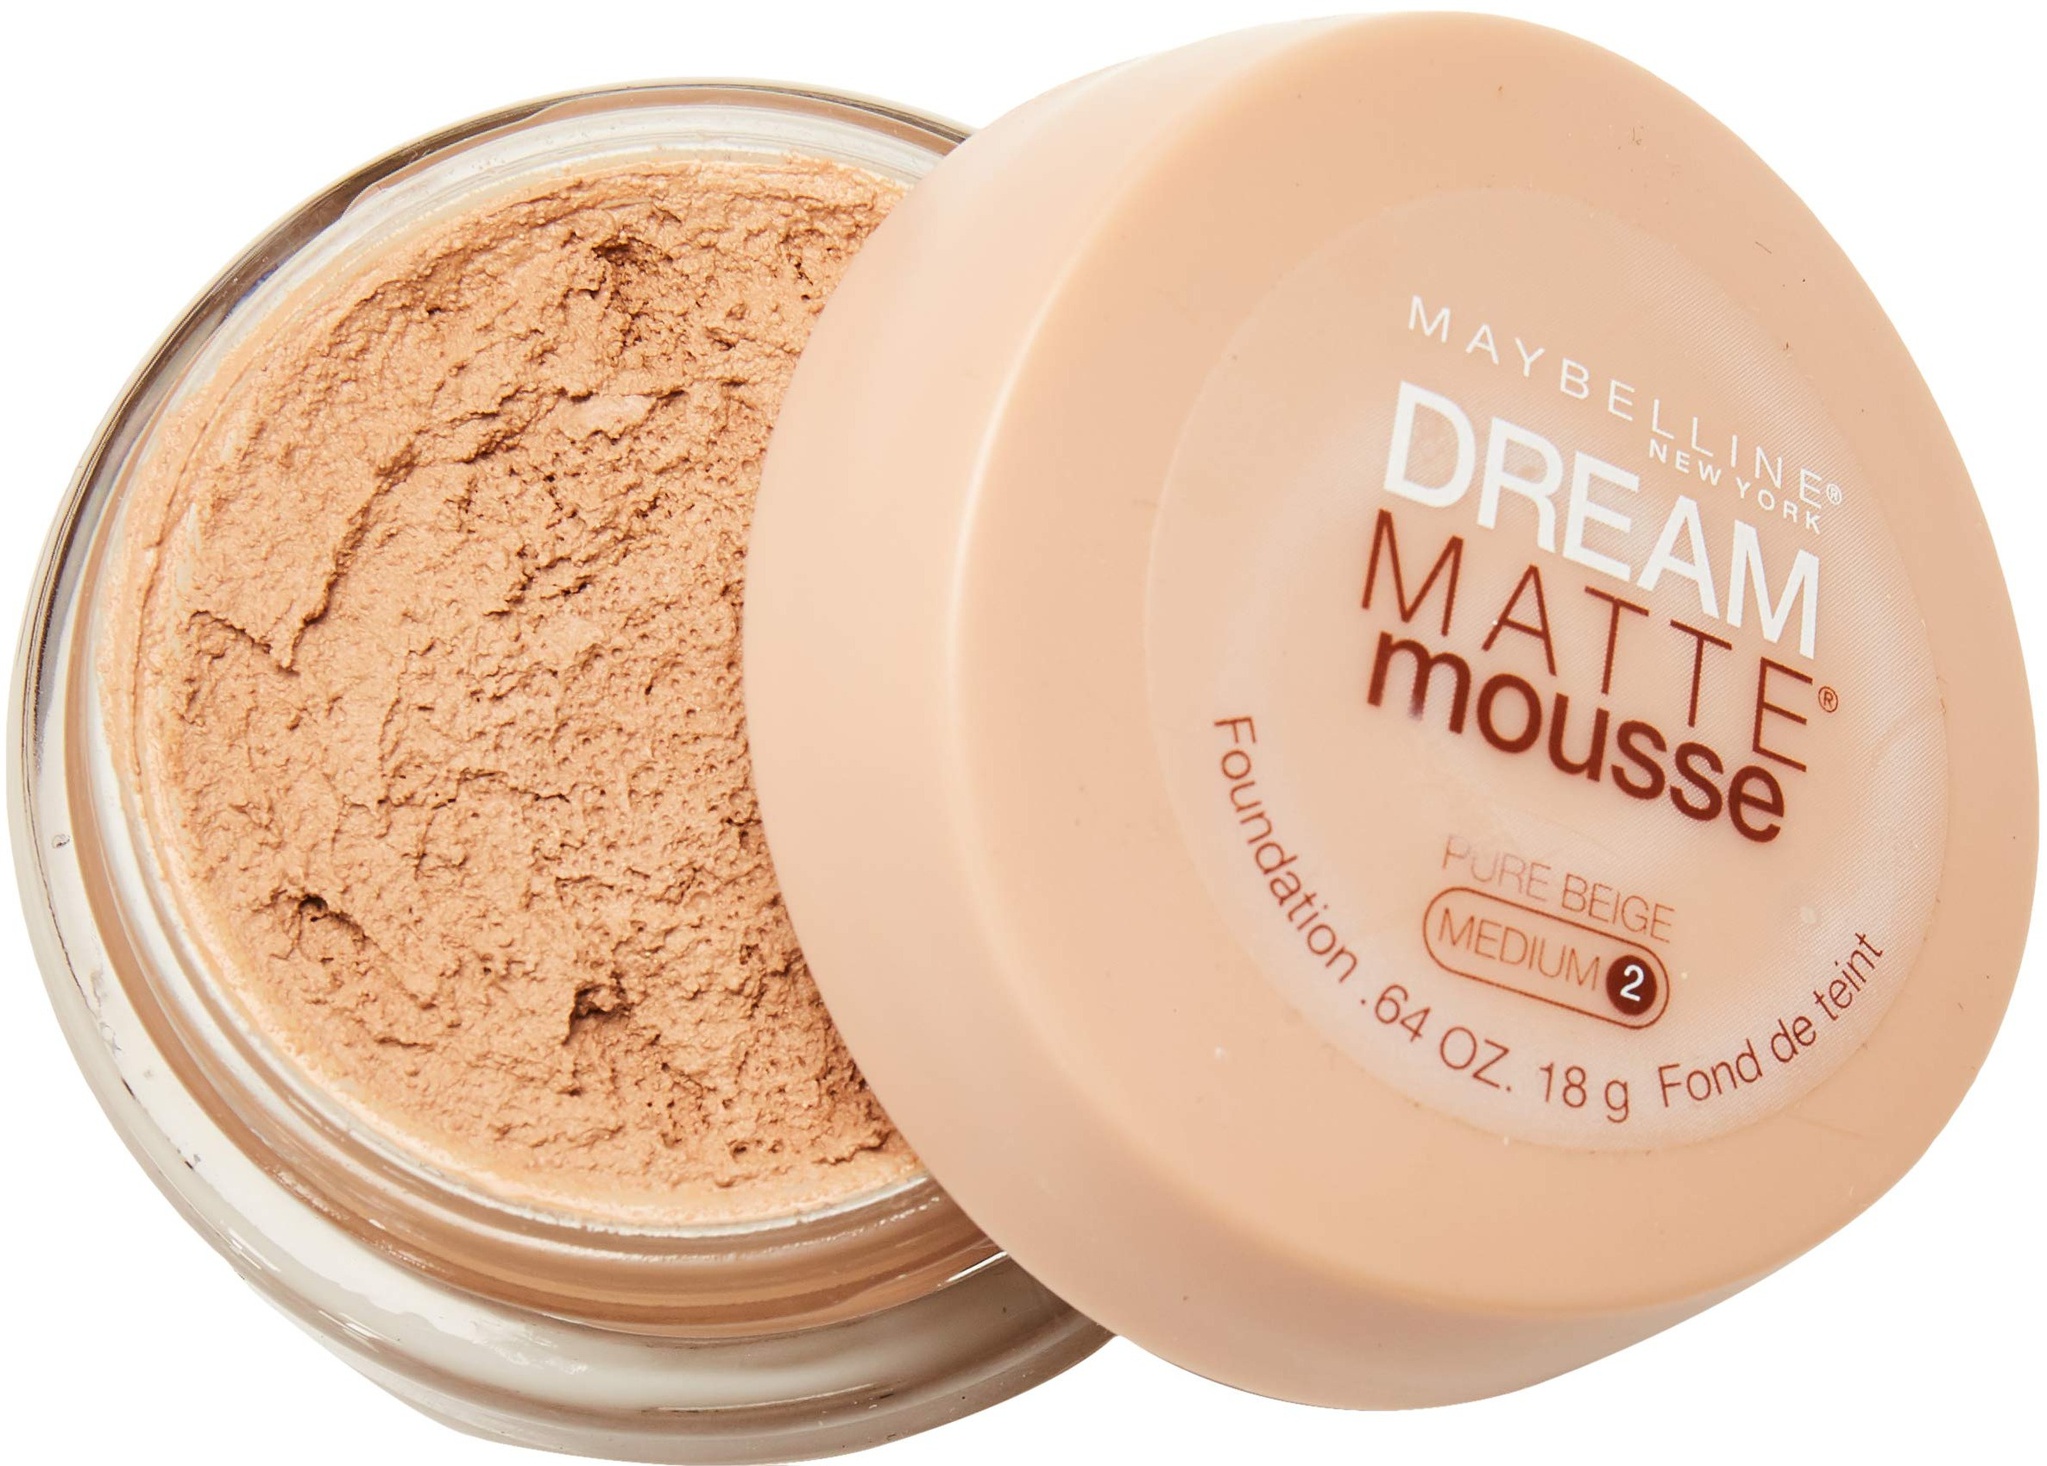 Maybelline Dream Matte Mousse Foundation (Canada)